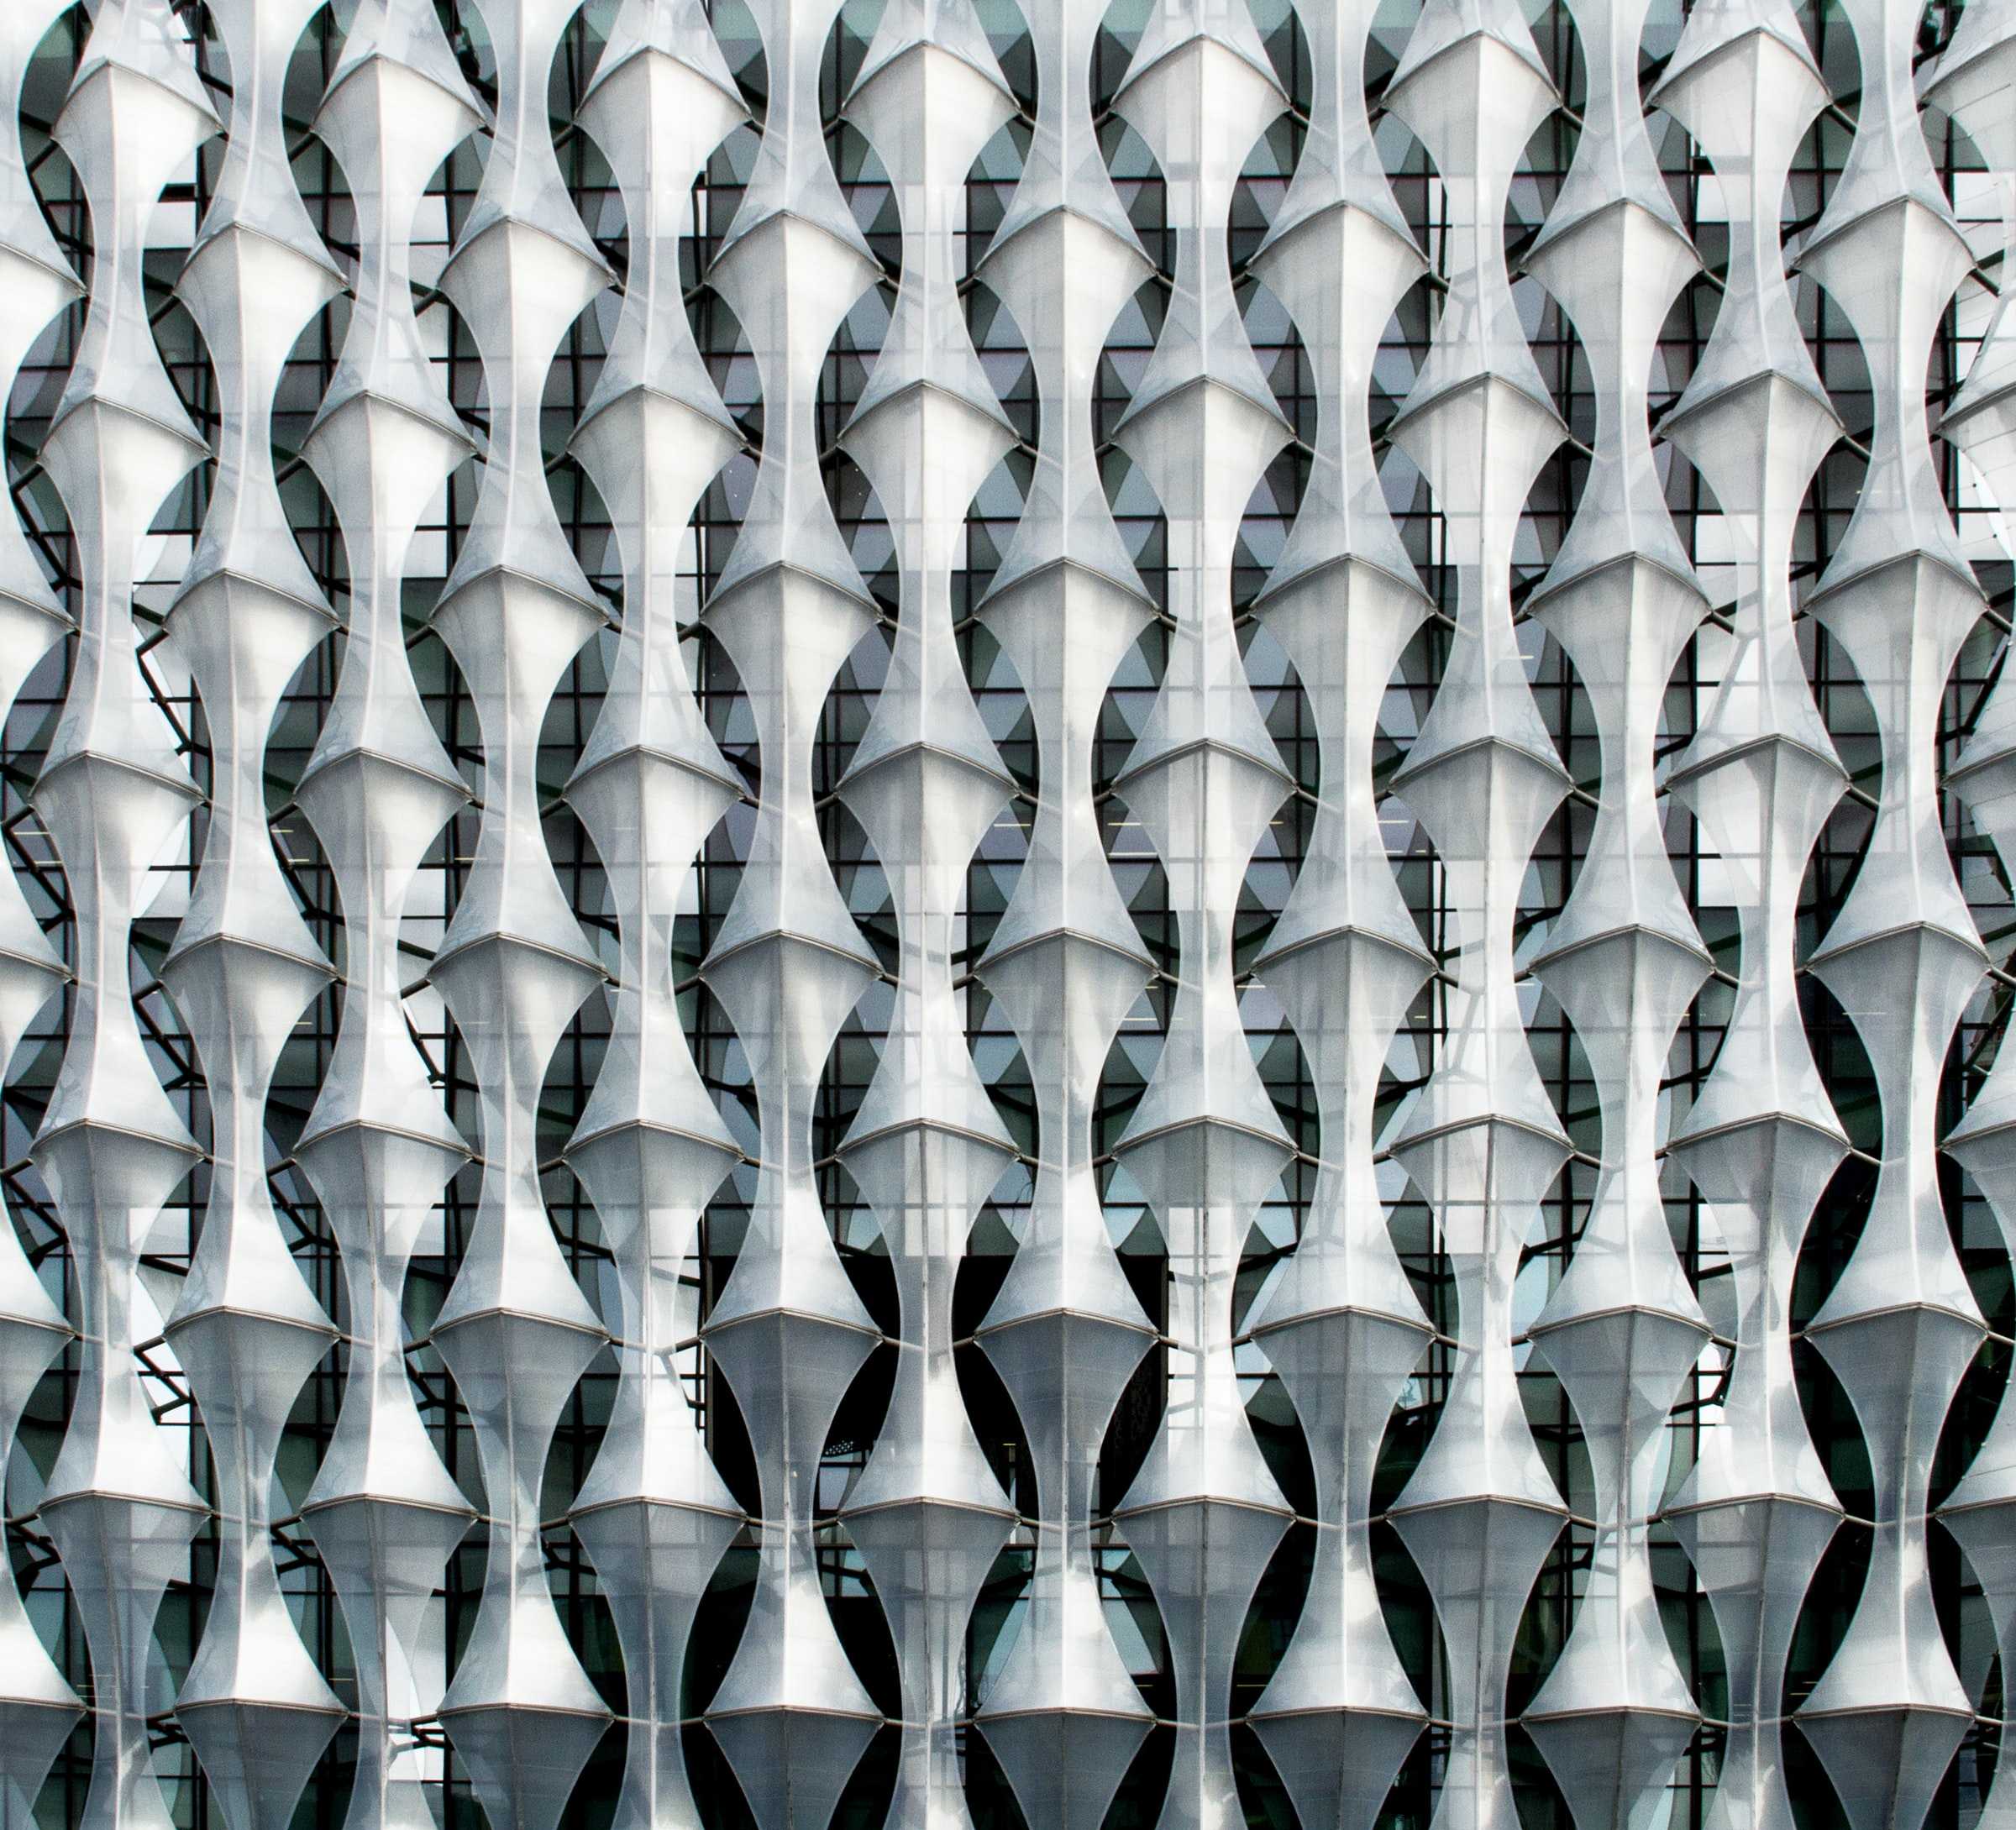 A building with repeating window patterns.